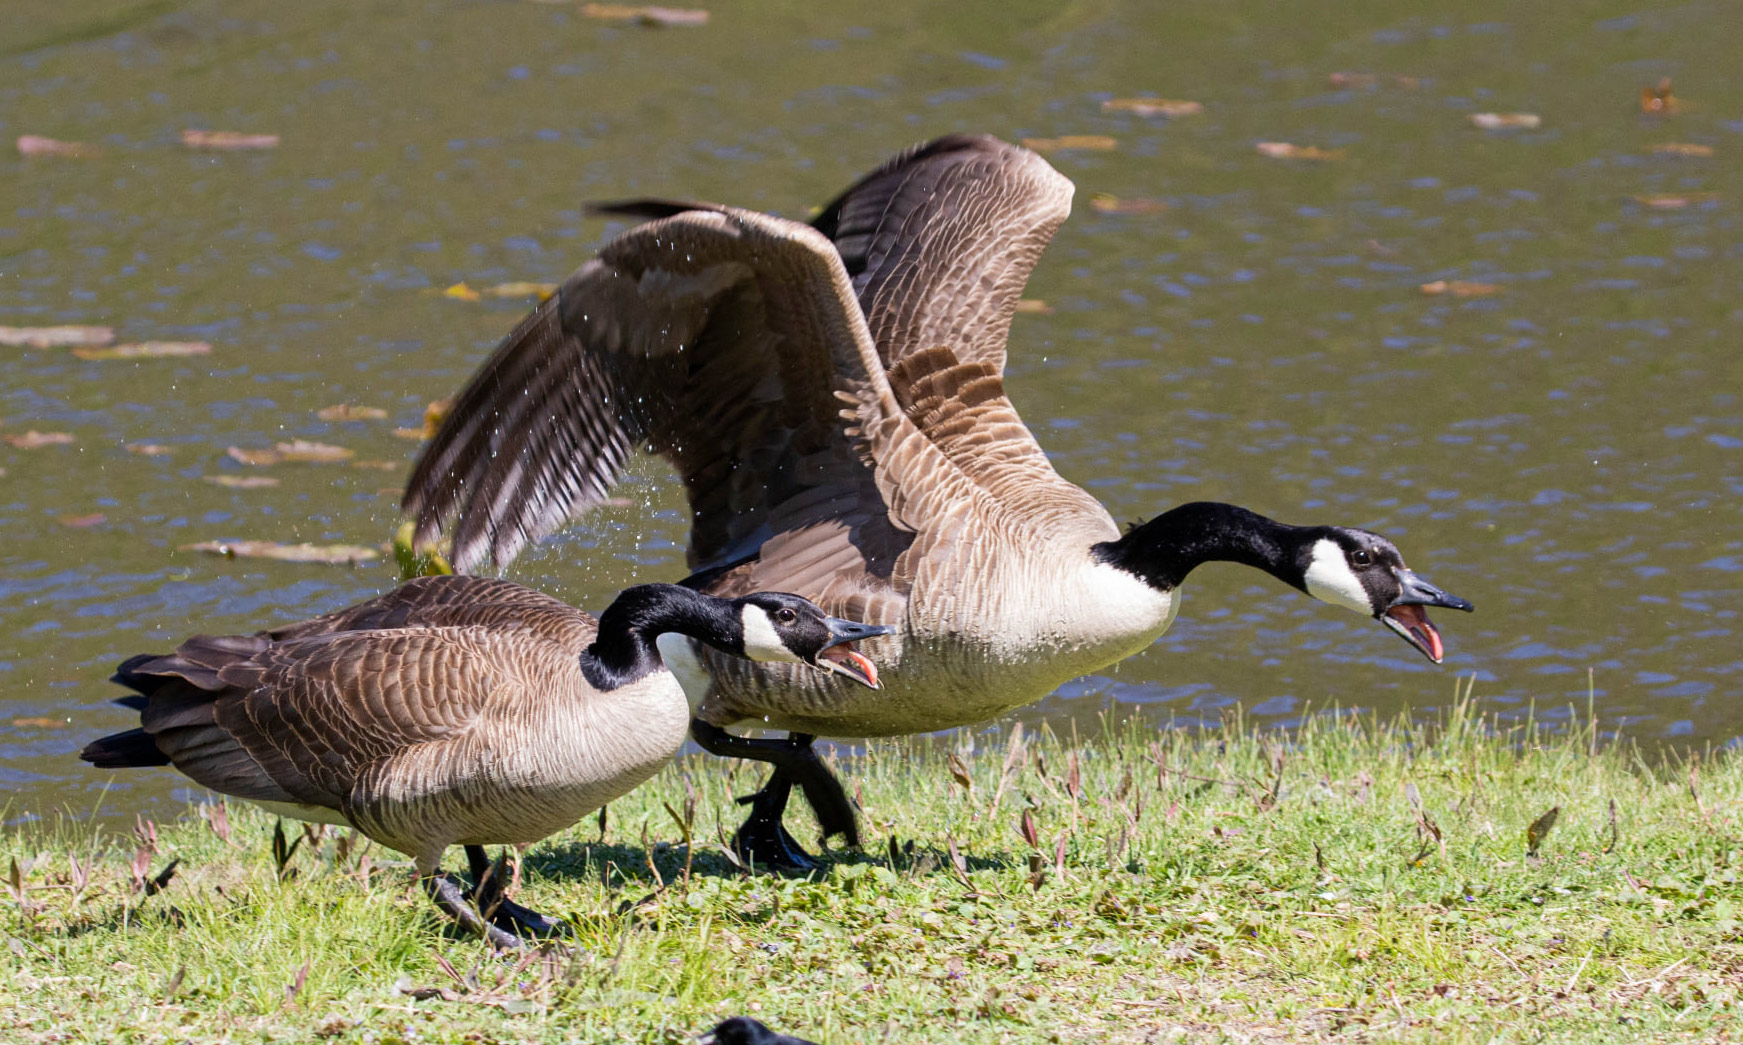 Two Canada geese in the grass in a defensive posture.